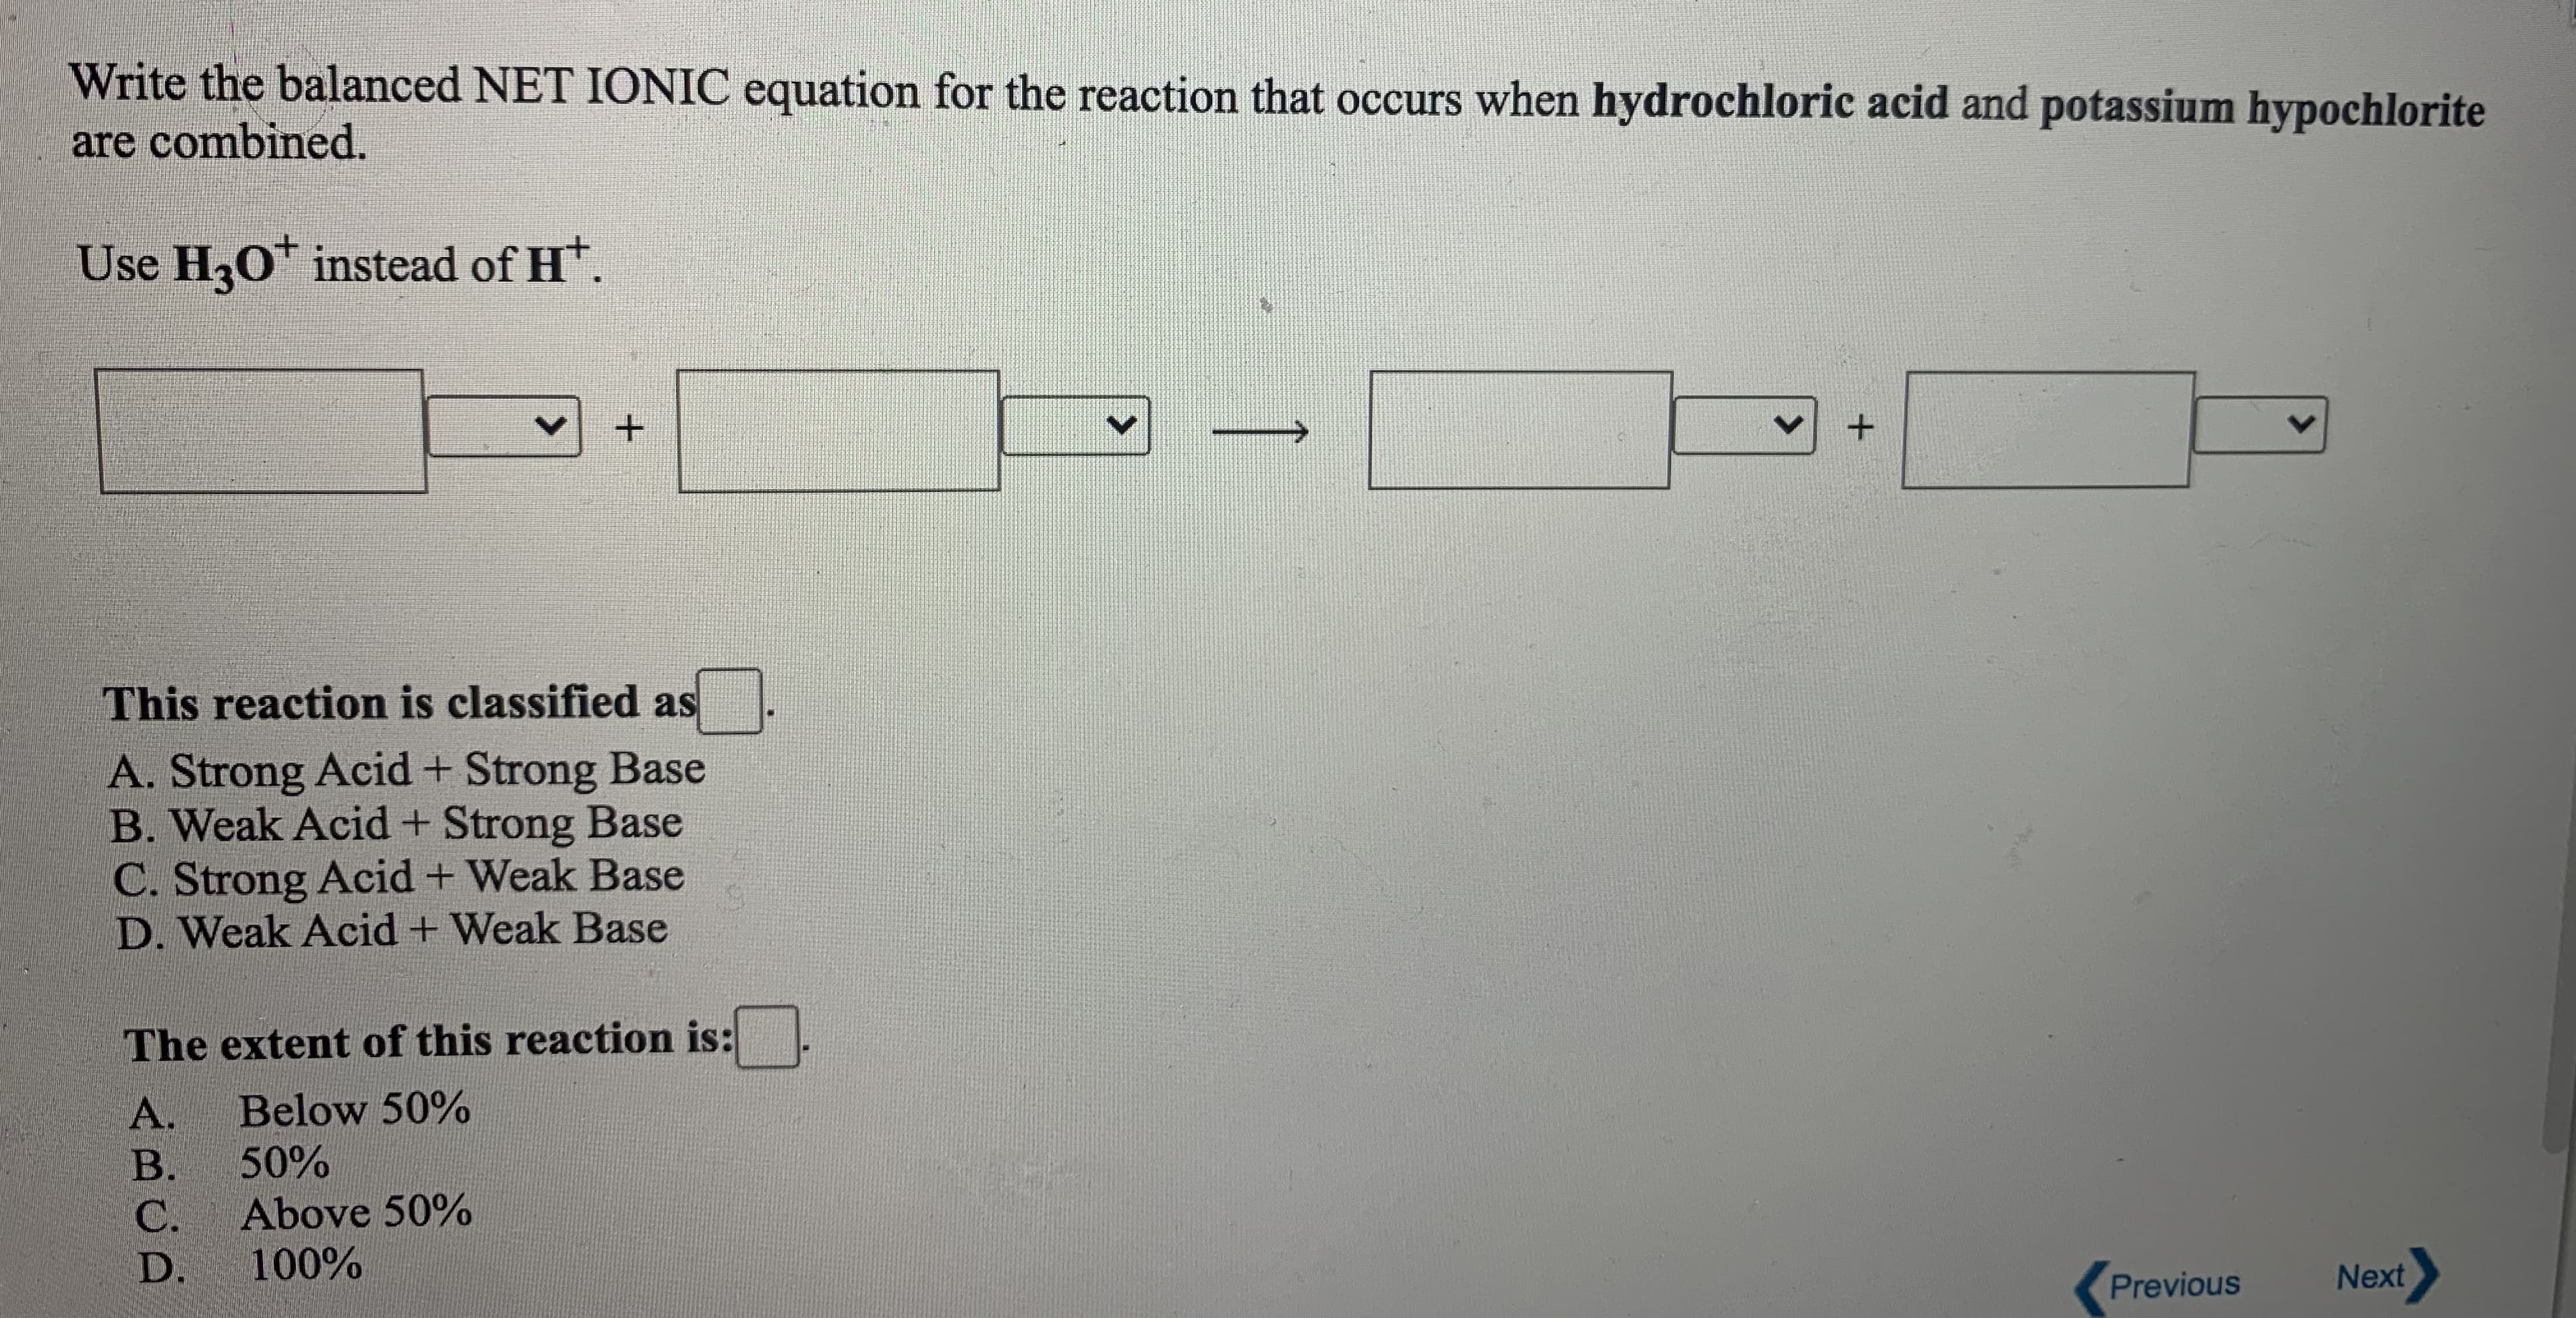 Write the balanced NET IONIC equation for the reaction that occurs when hydrochloric acid and potassium hypochlorite
are combined.
Use H30* instead of Ht.
